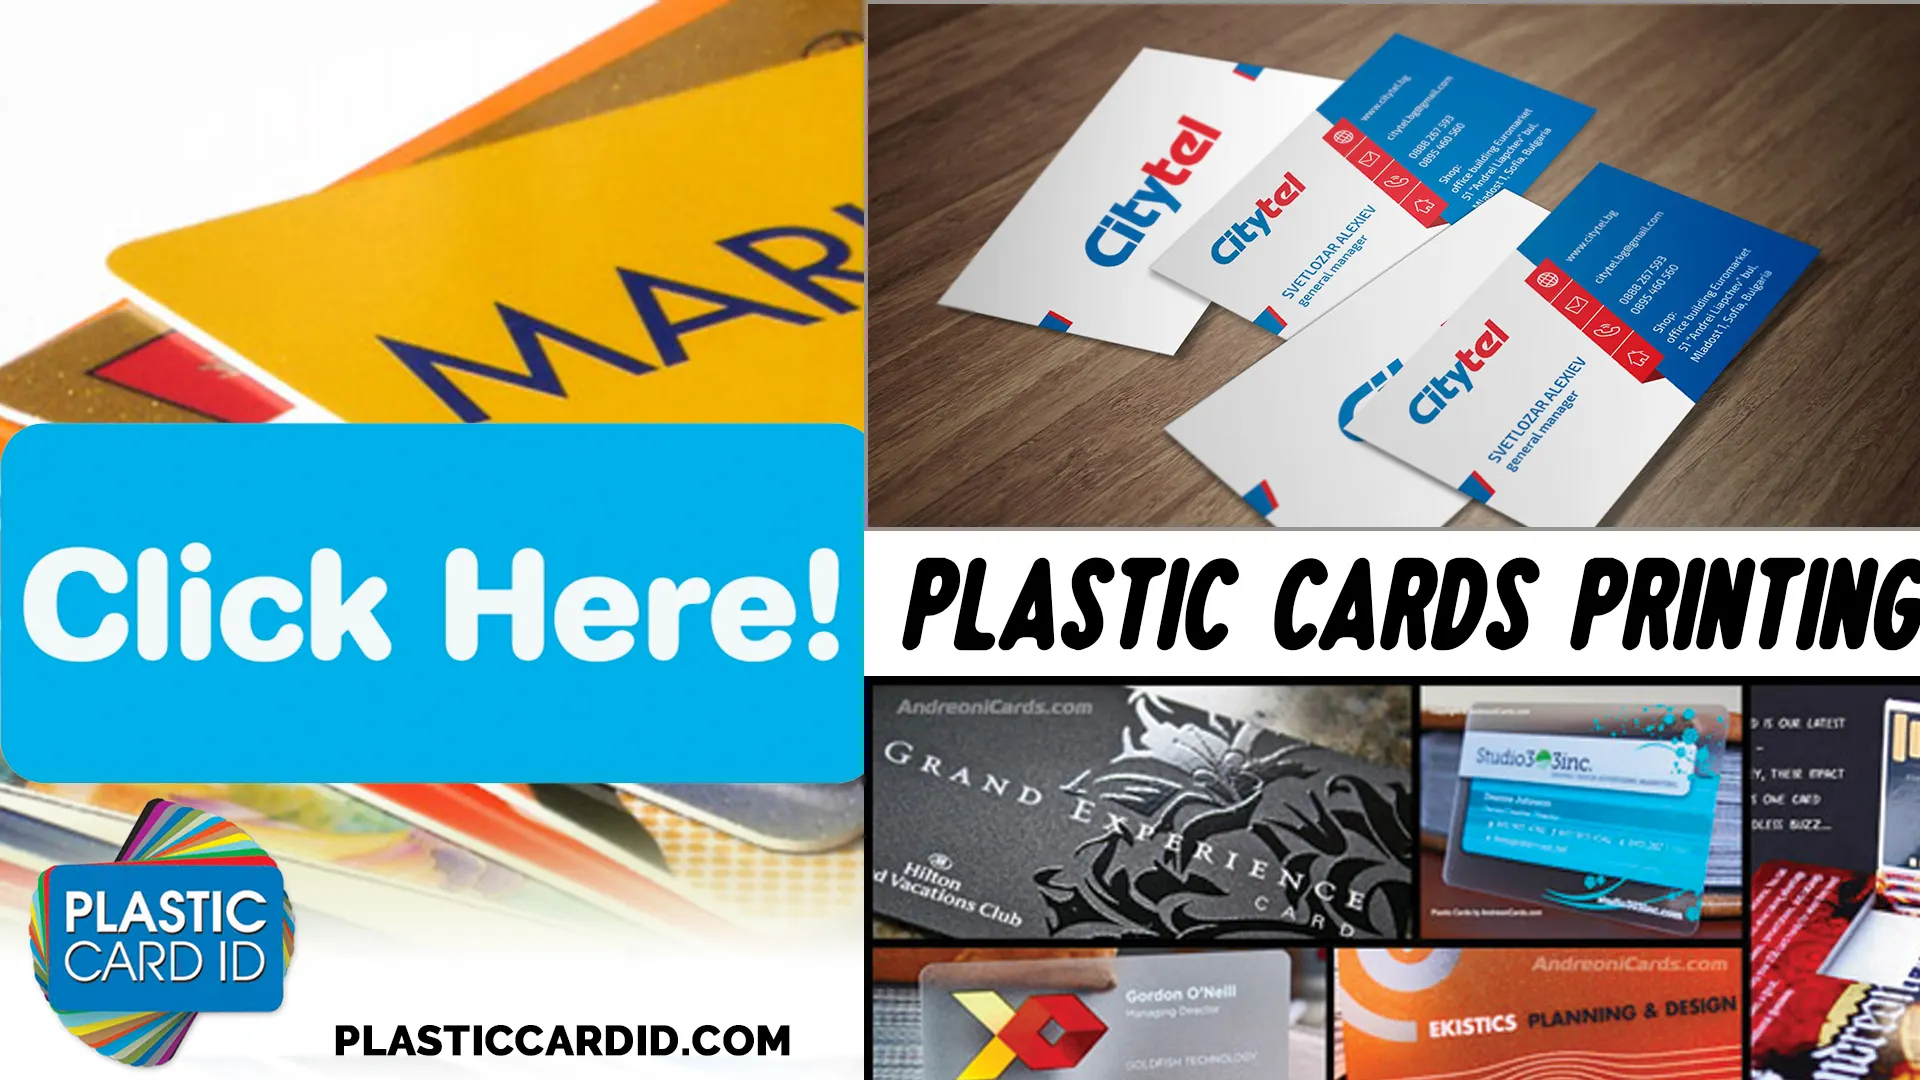 Real-World Scenarios Where Plastic Card ID
 Made a Difference